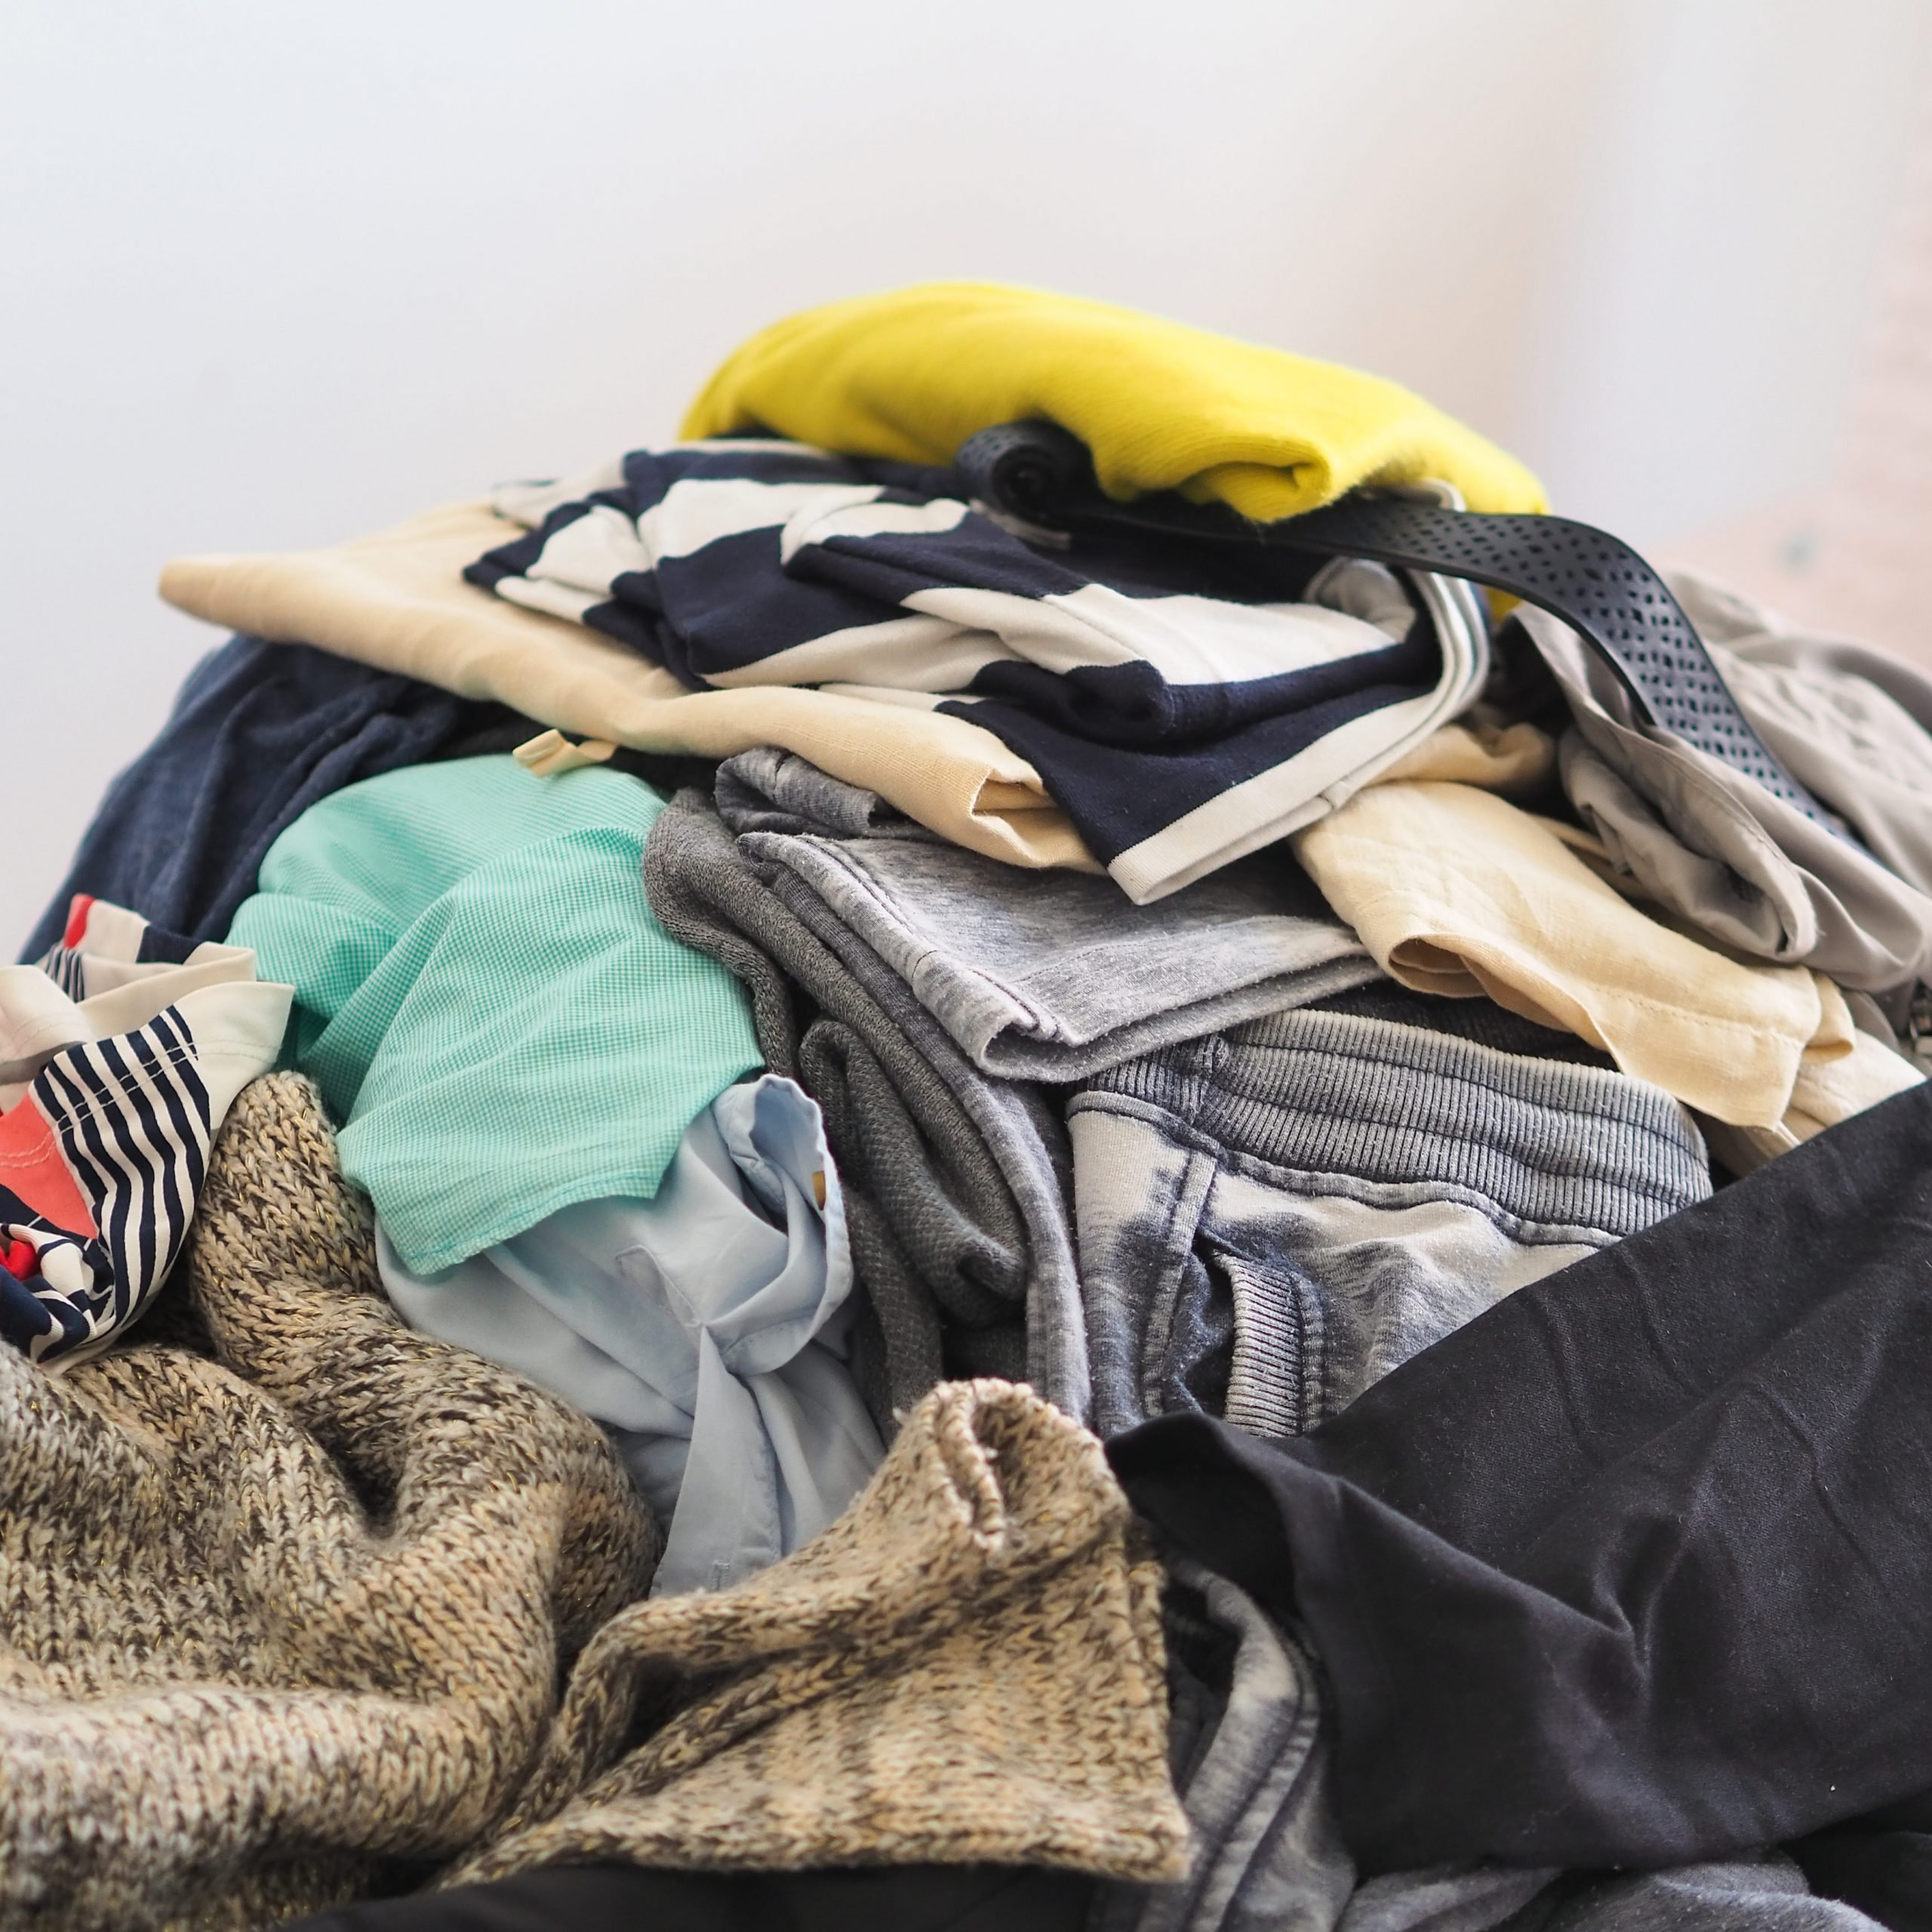 Things You Should Never Throw Out (and How to Reuse Them) | Reader's Digest